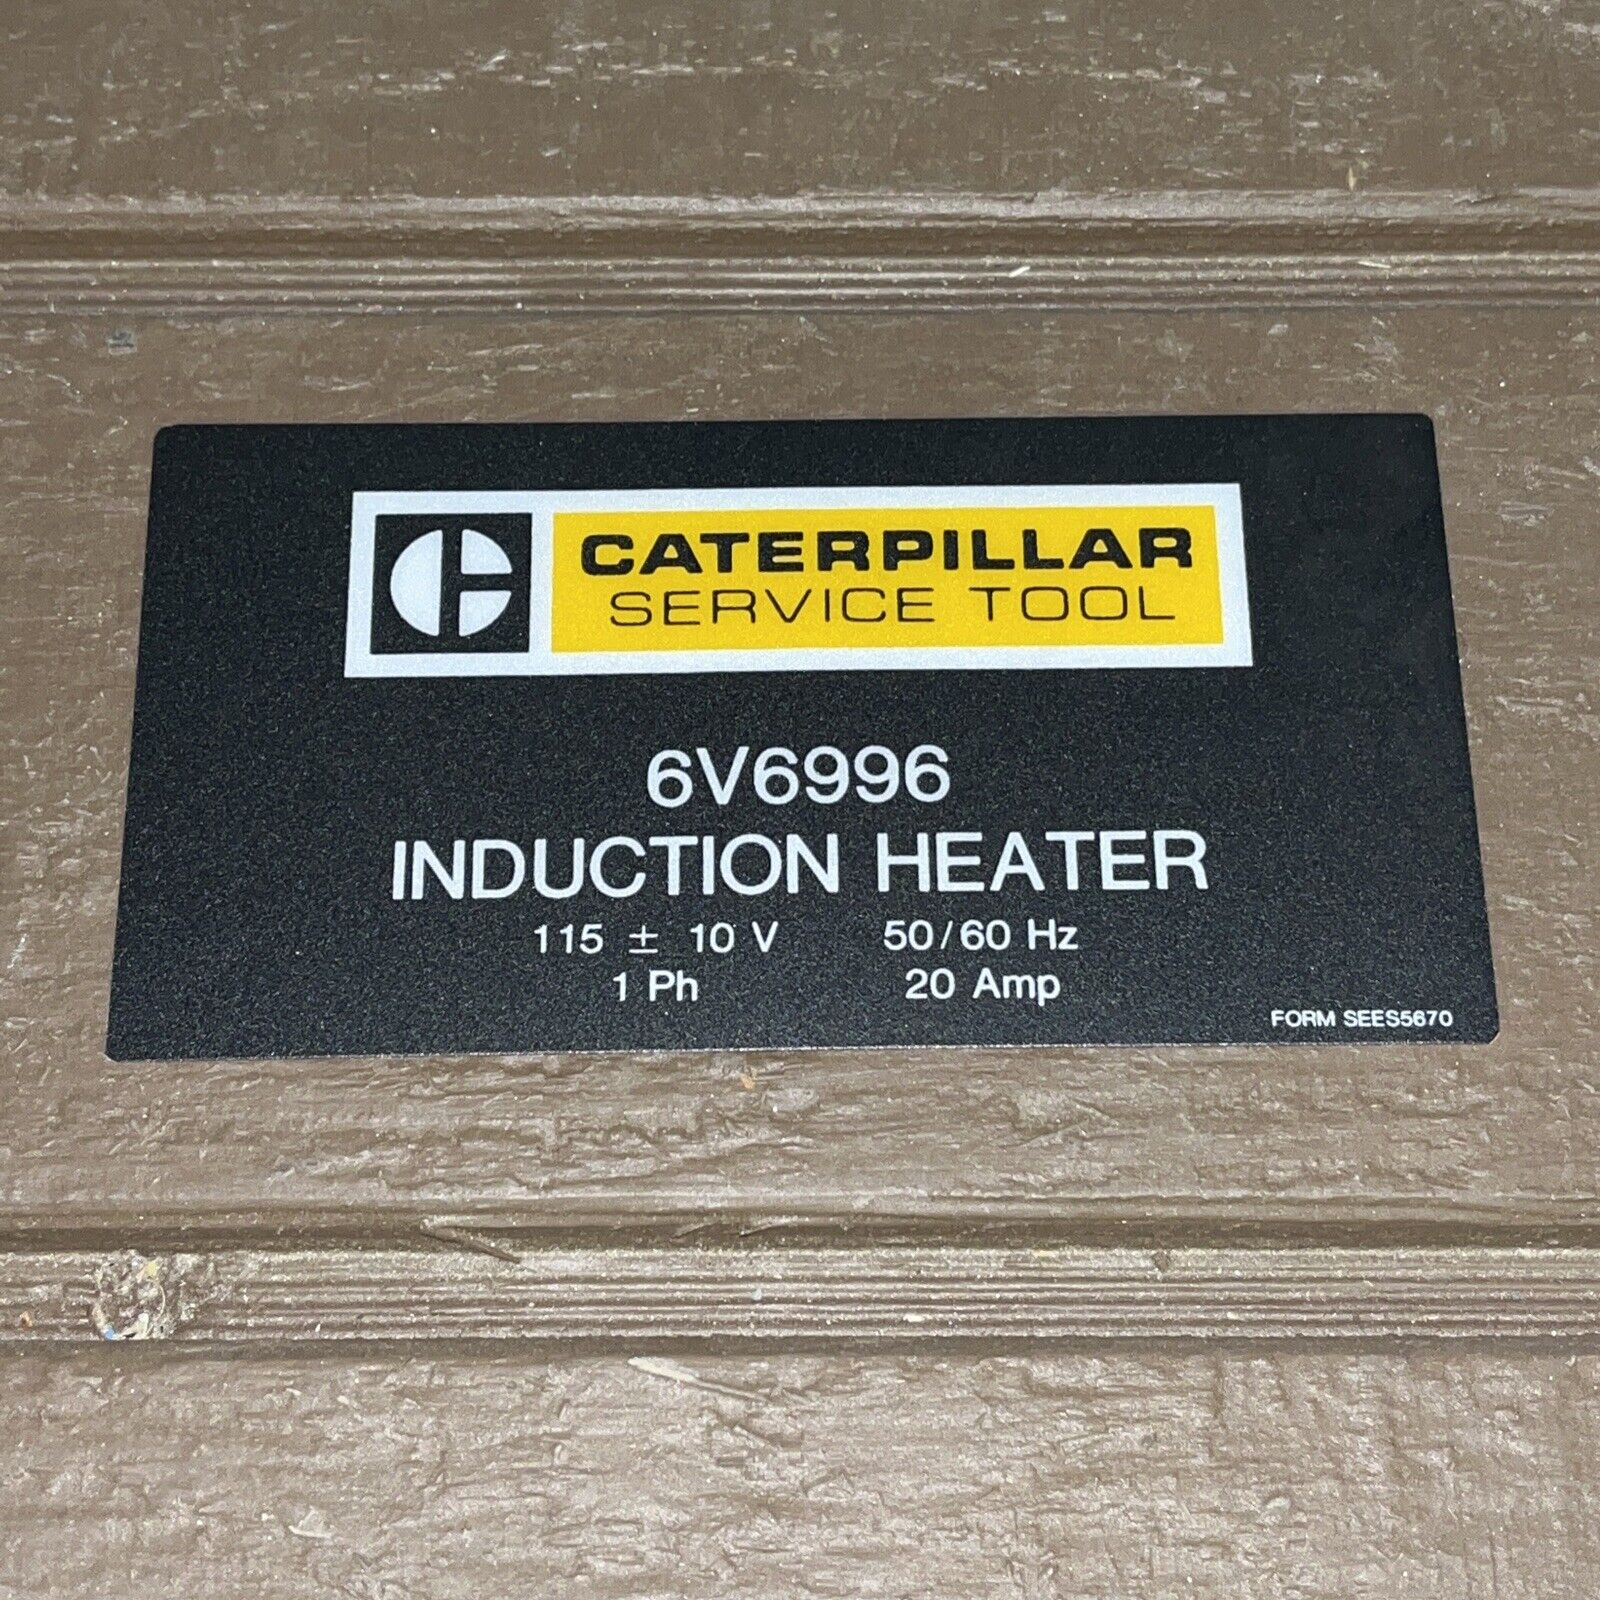 Vintage CAT Caterpillar Service Tool Induction Heater 6V6996 Sticker Decal NOS